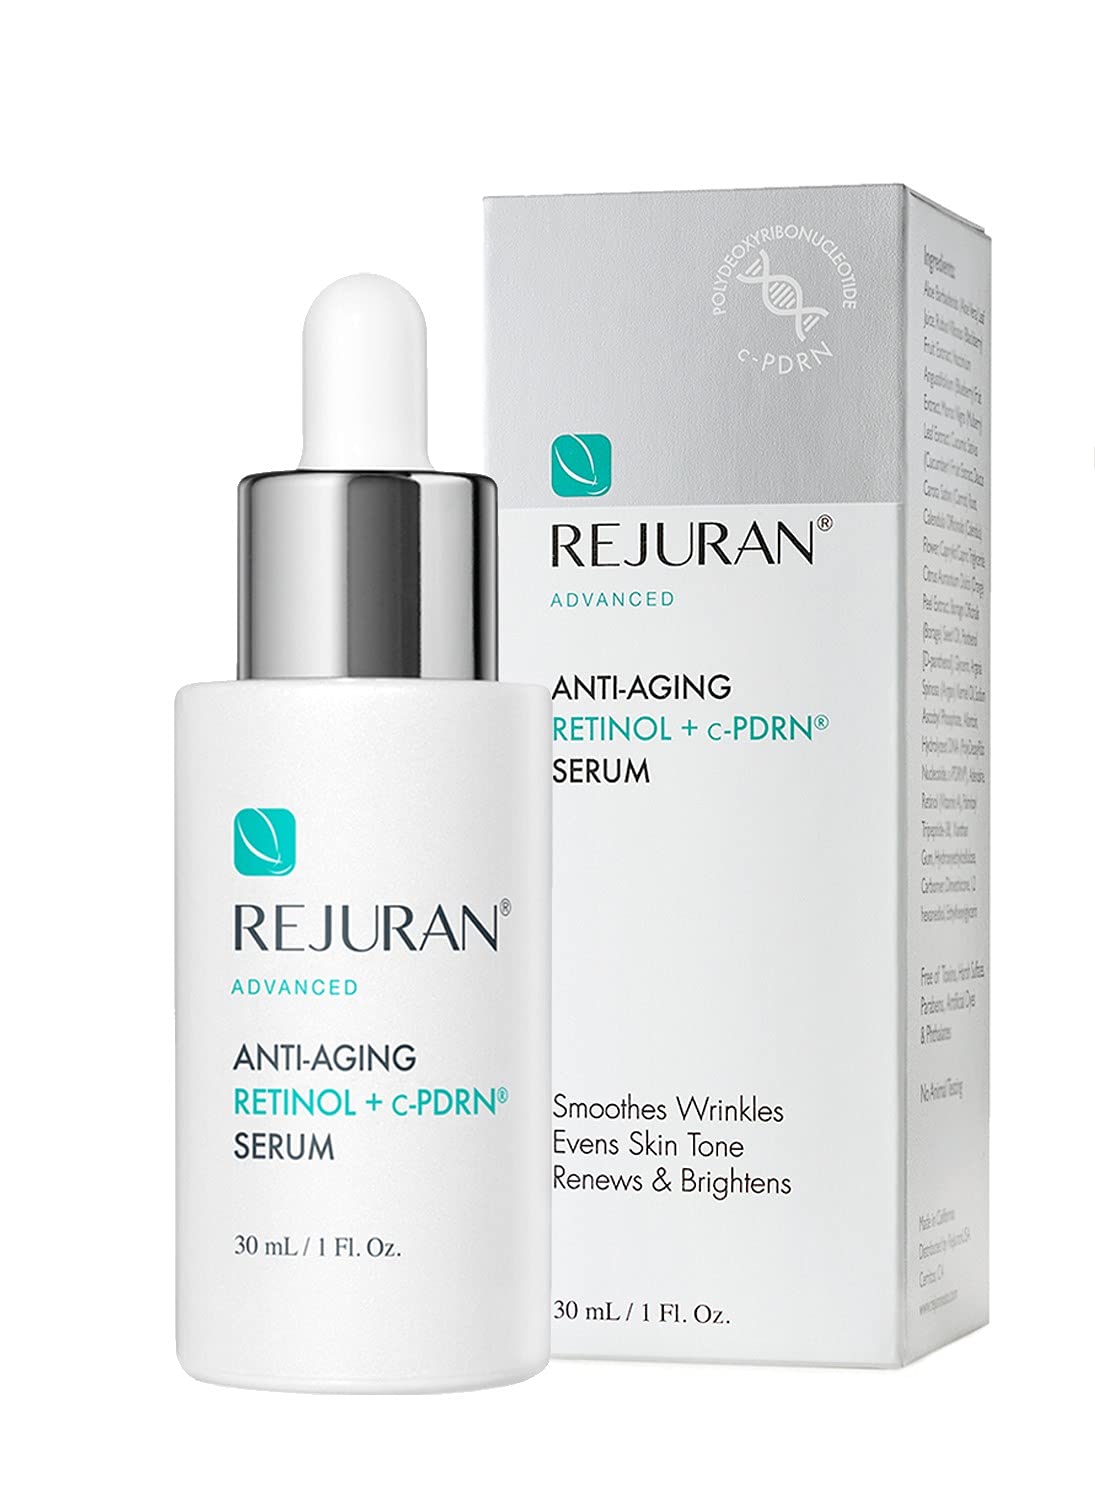 Rejuran® Advanced Anti-Aging Retinol + c-PDRN® Serum for Face and Neck – Triple Action with c-PDRN®, Retinol, and Peptides